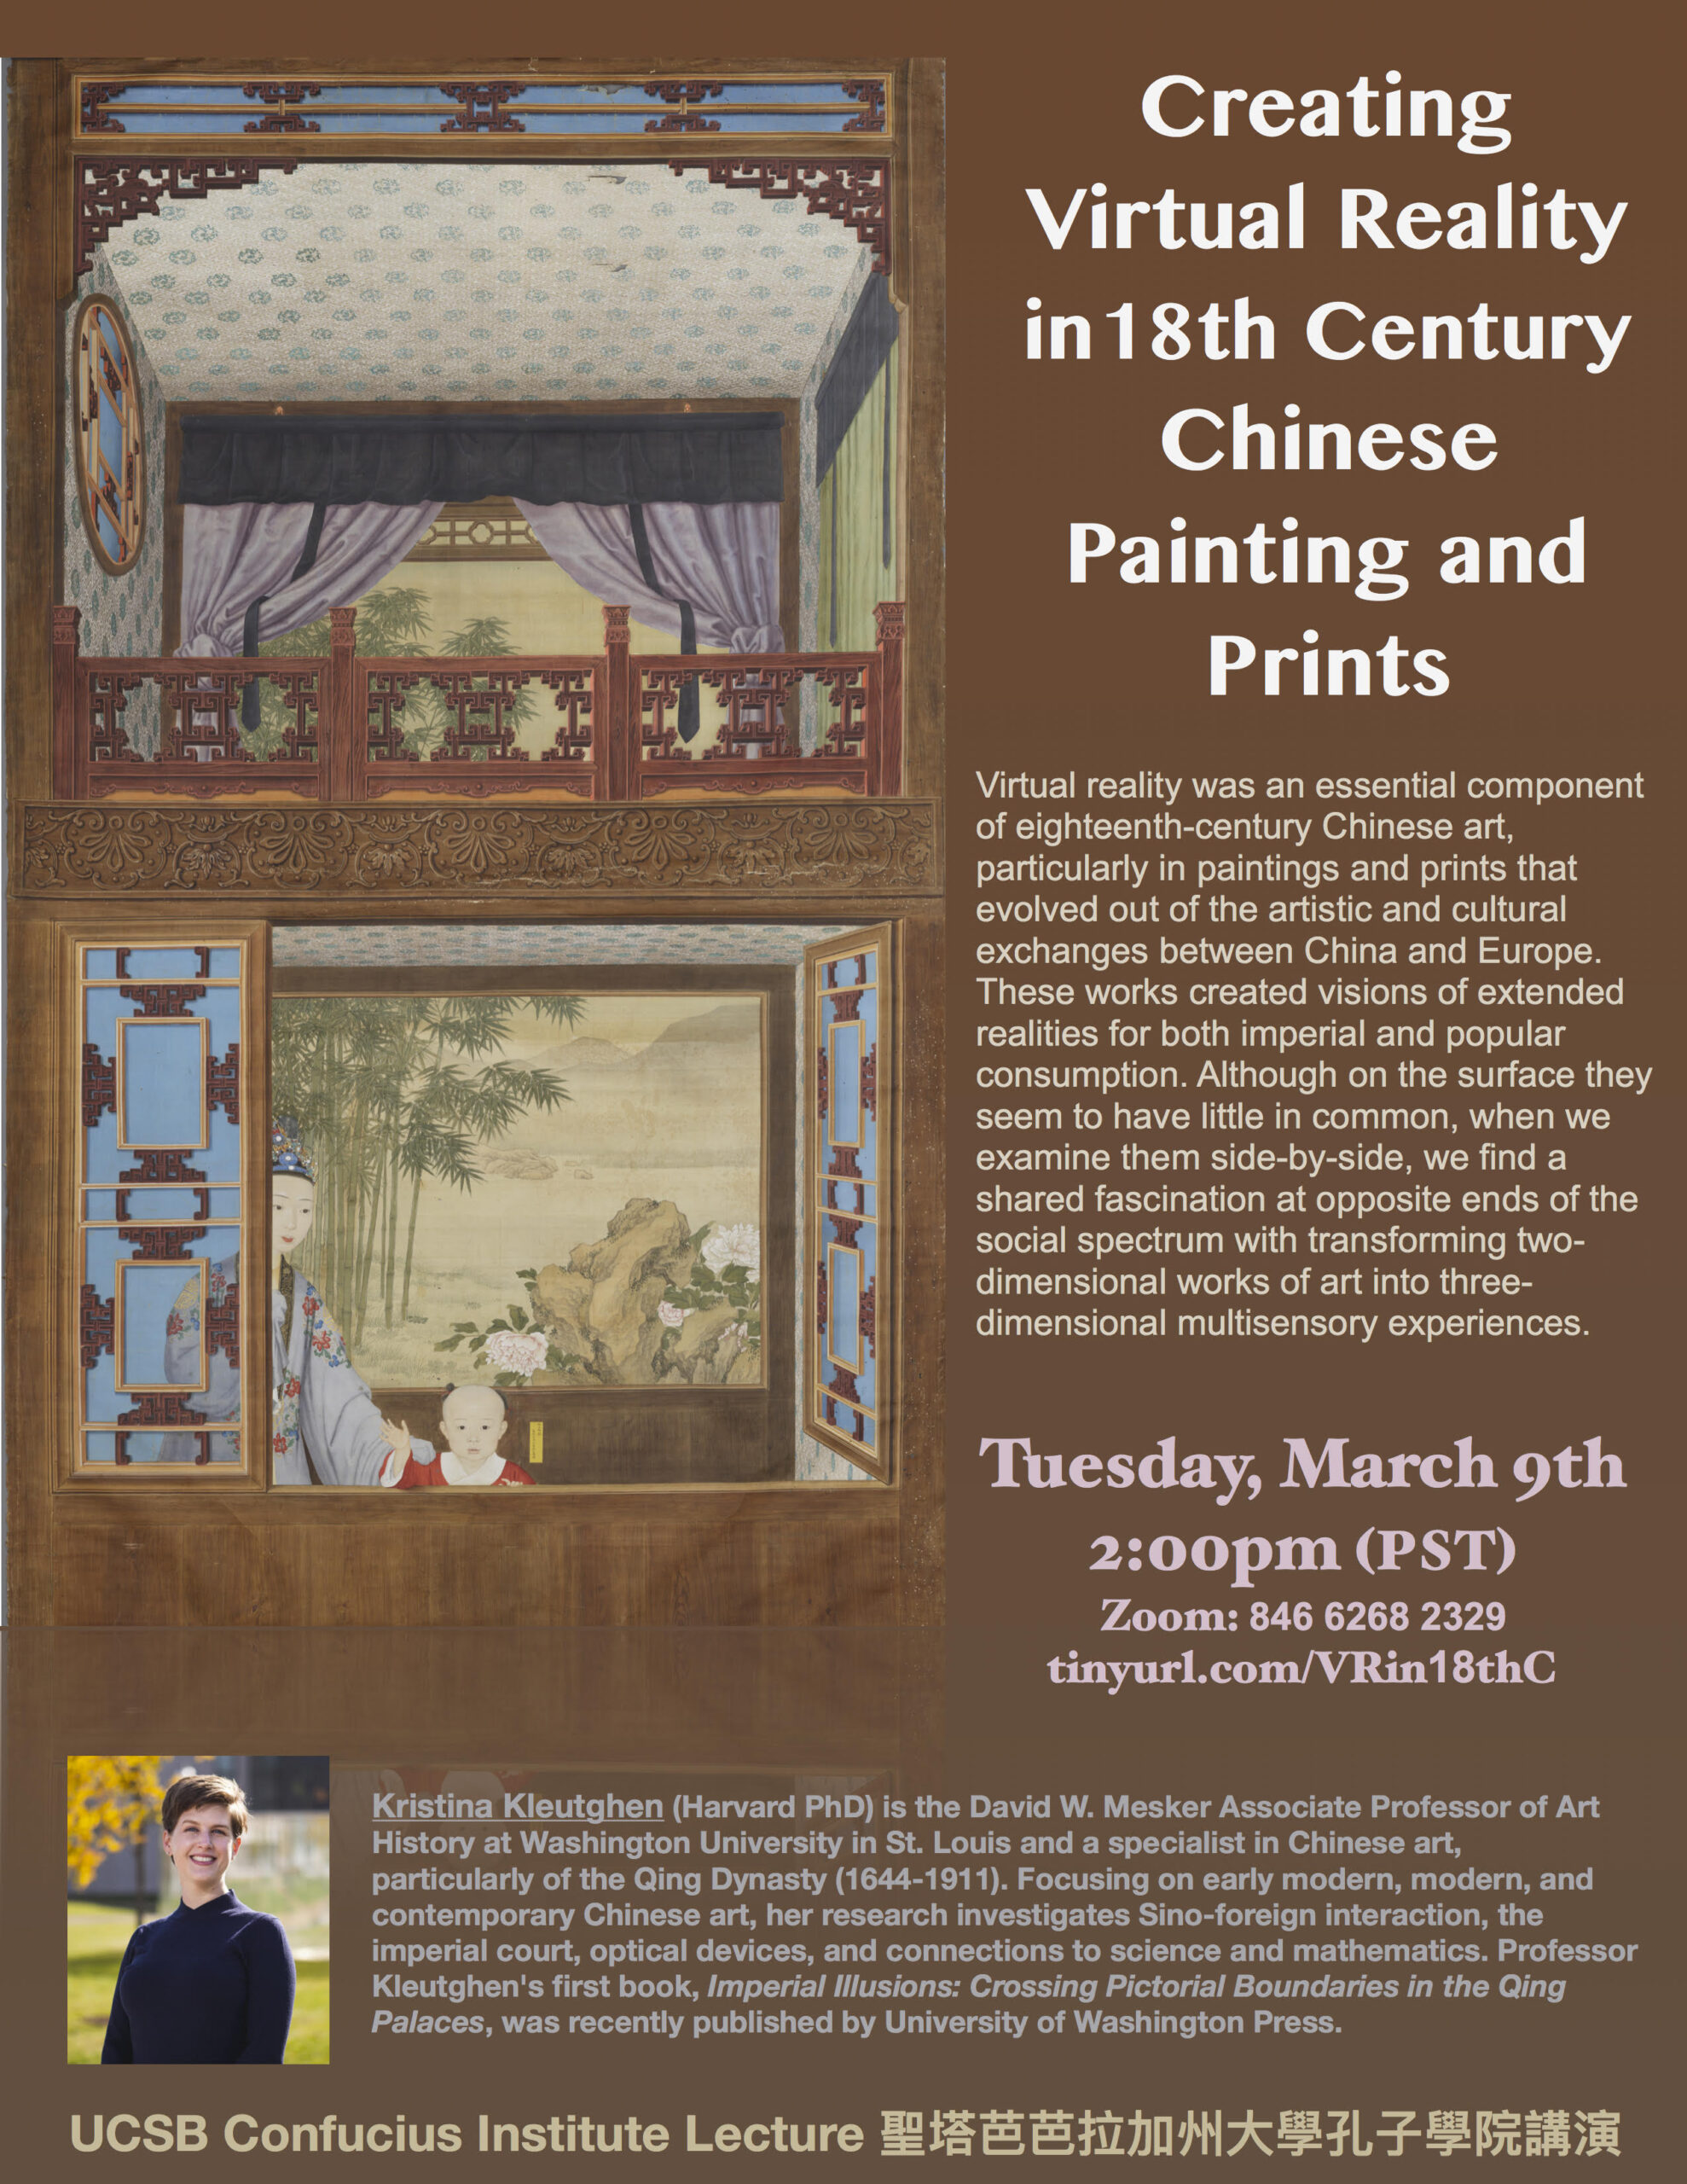 Flyer for Zoom talk "Creating Virtual Reality in 18th Century in 18th Century Chinese Painting and Prints" by Kristina Kleutghen on 3/9 at 2PM